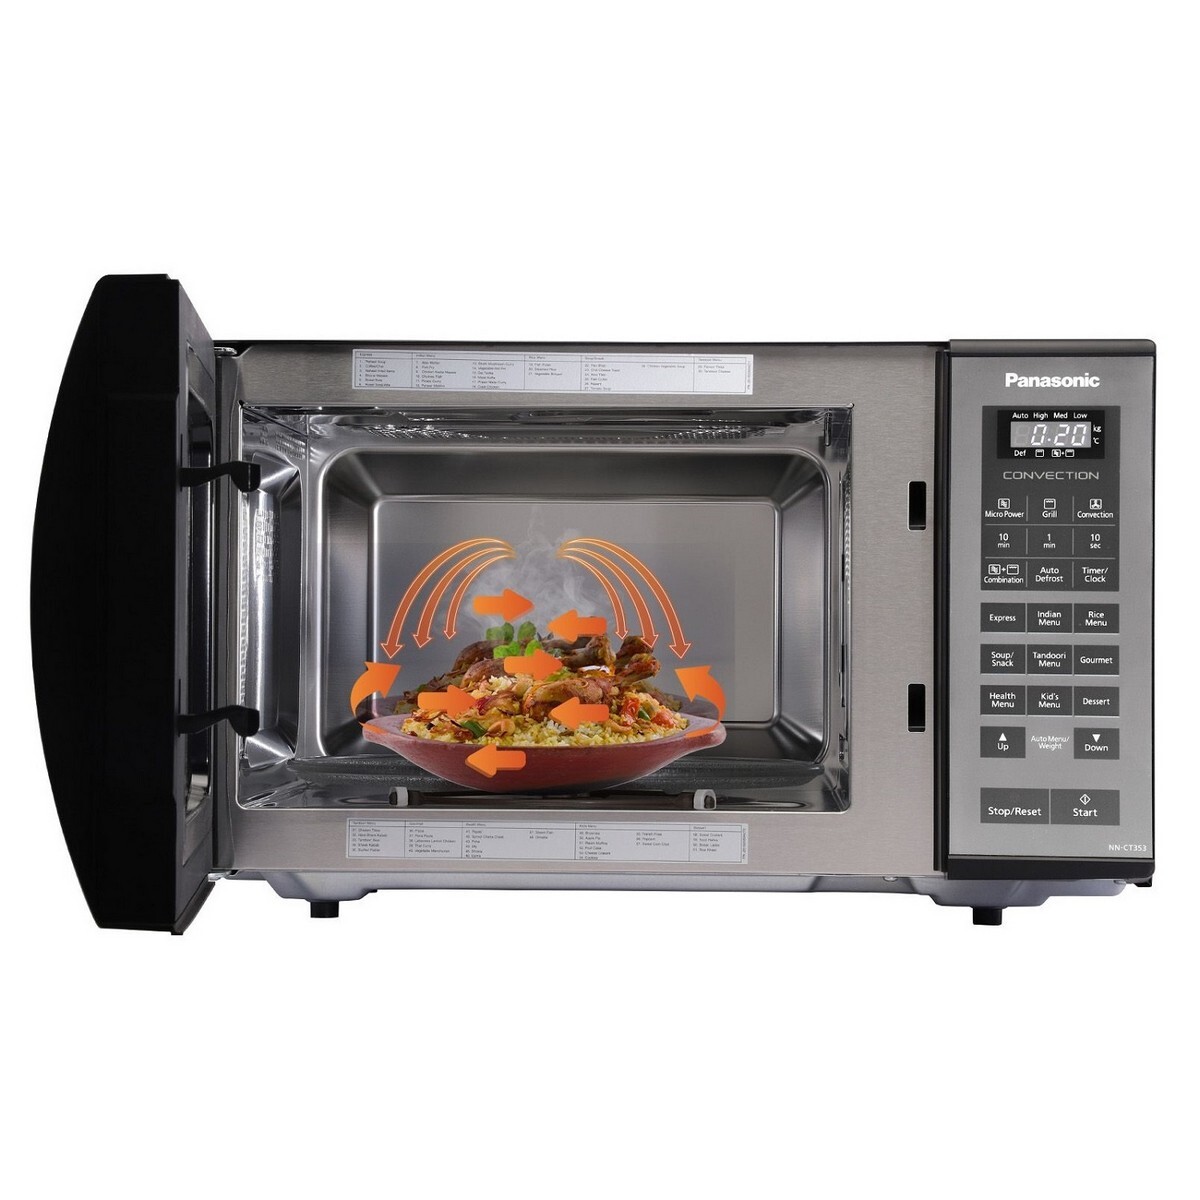 Panasonic 23L Convection Microwave Oven NN-CT35MBFDG